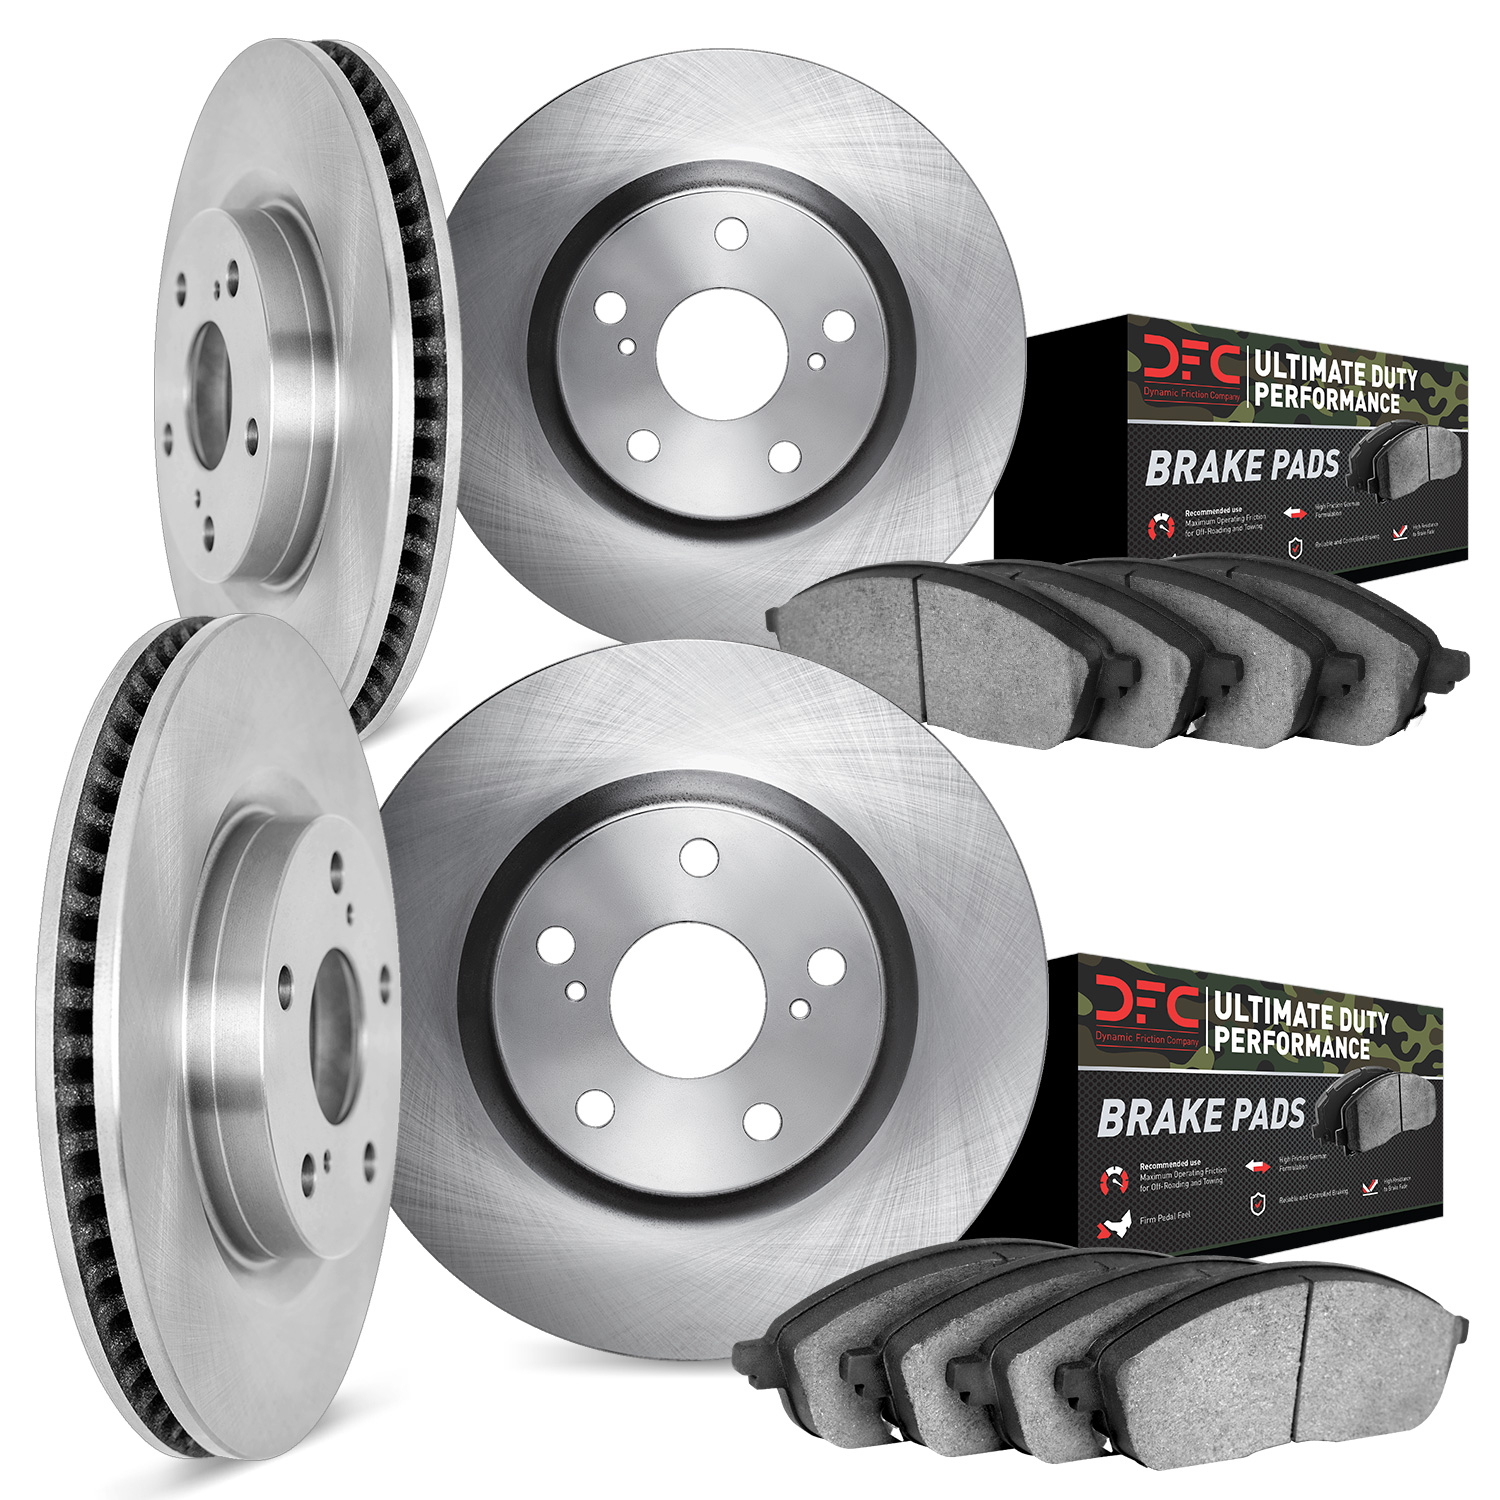 6404-48006 Brake Rotors with Ultimate-Duty Brake Pads, 1998-2005 GM, Position: Front and Rear